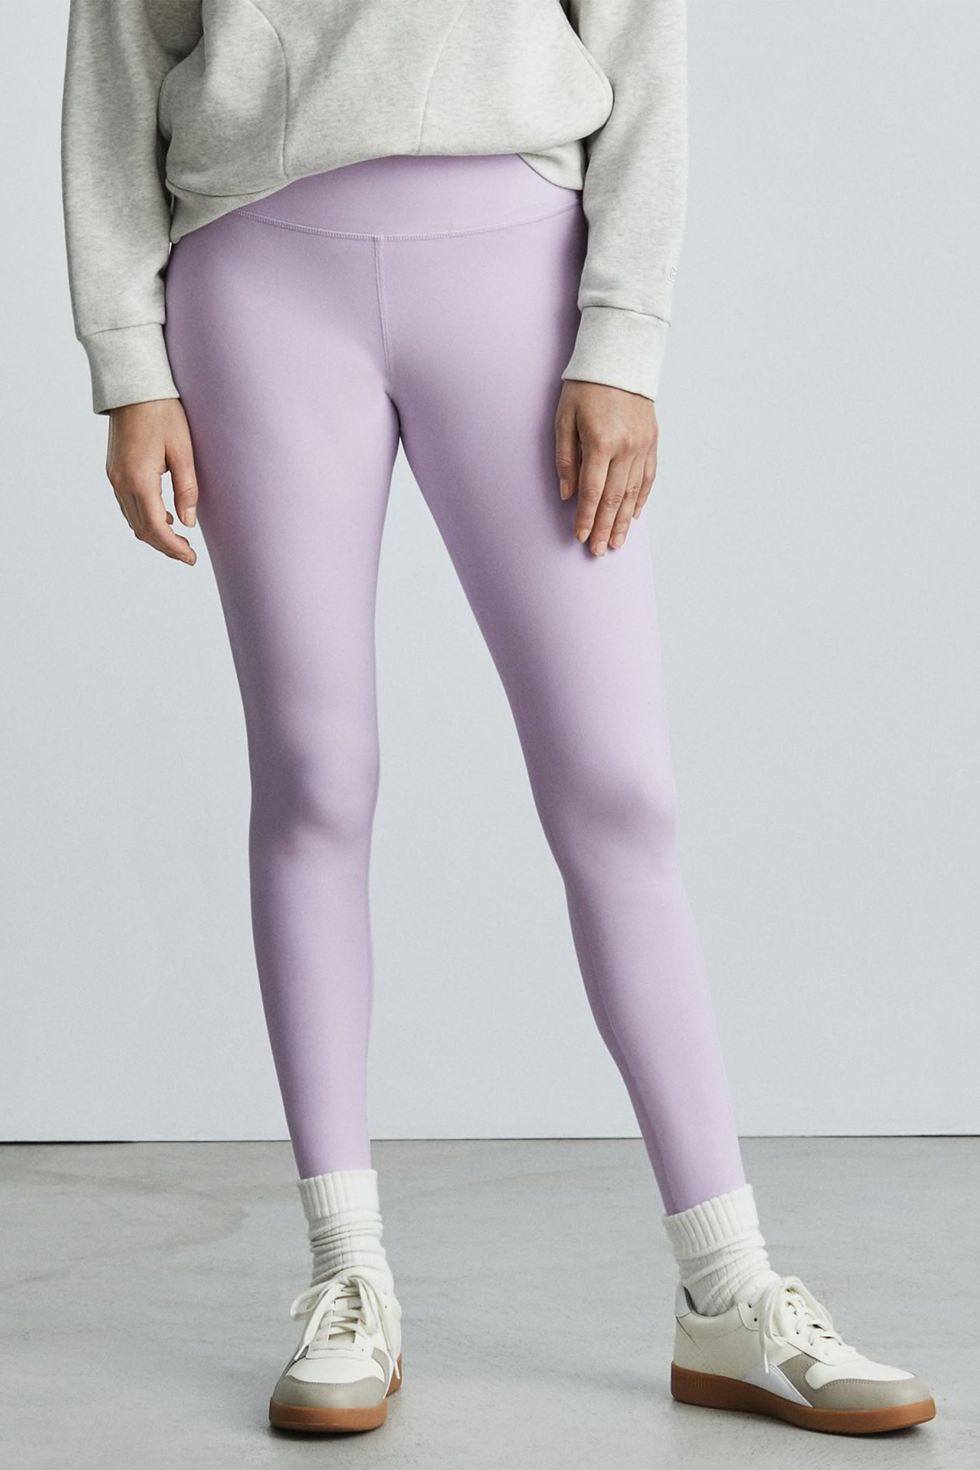 These bestselling leggings loved by over 46,000  reviewers